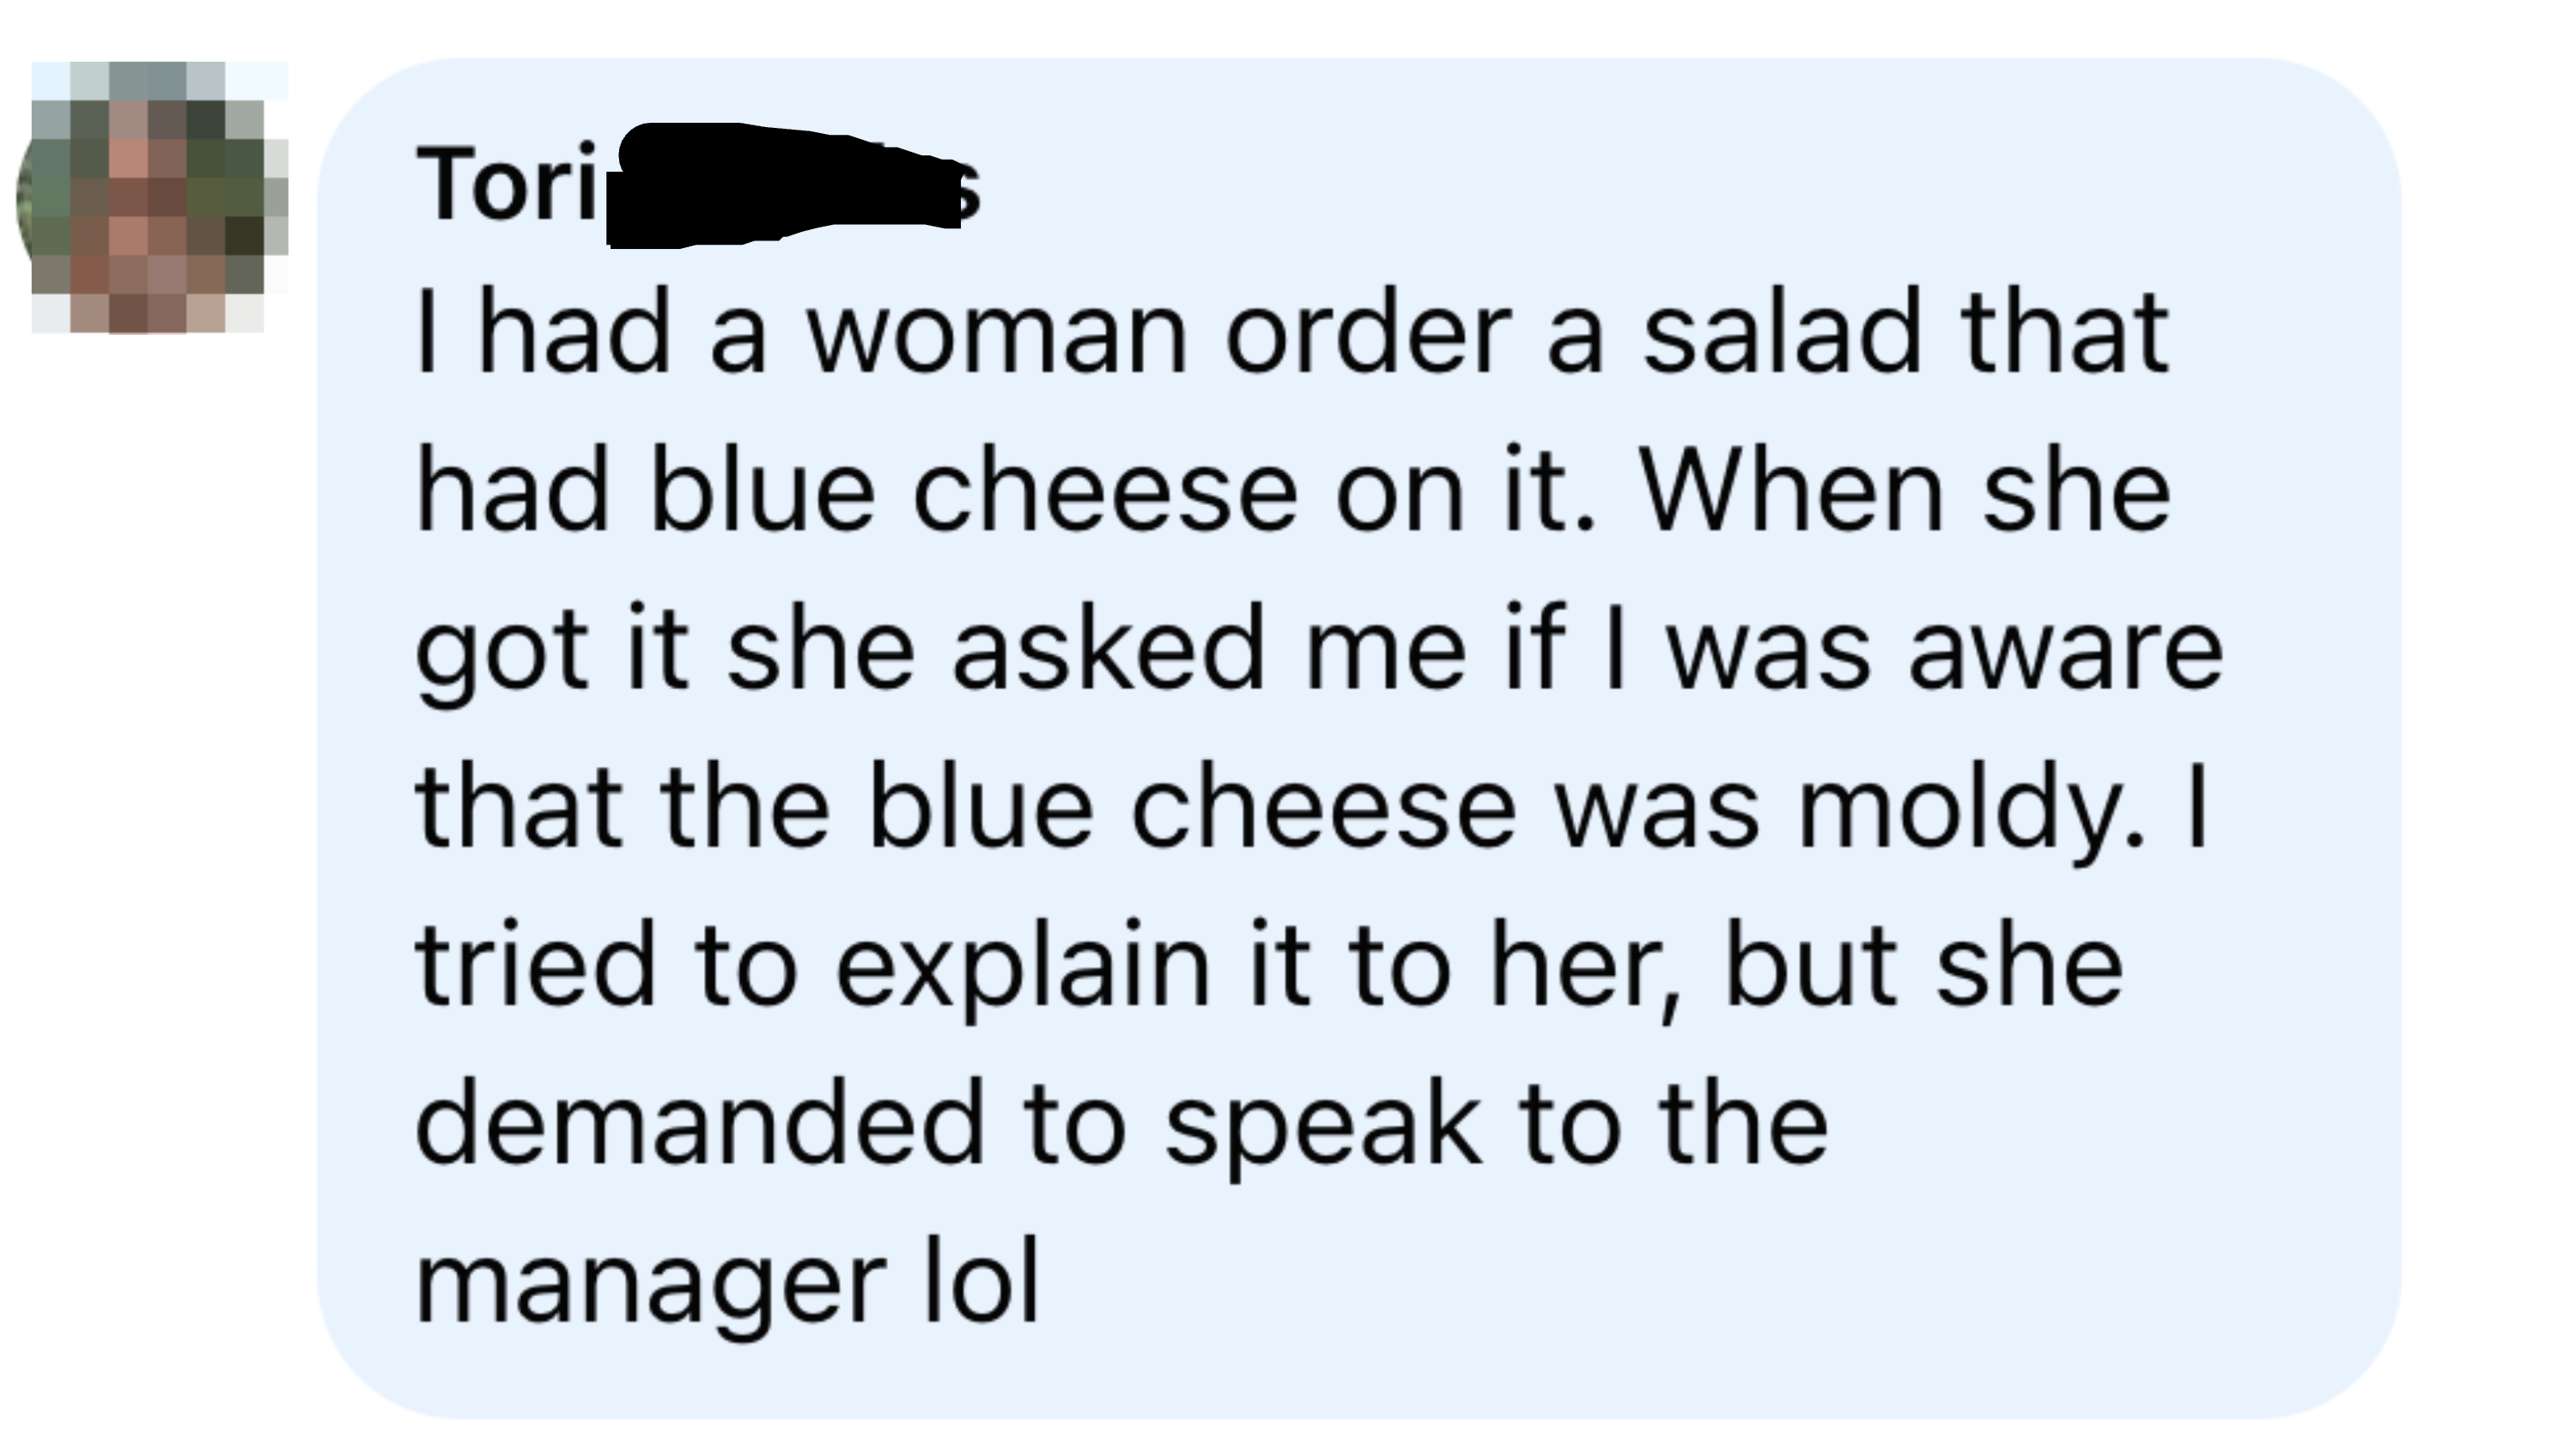 Text about a customer not realizing a salad ordered with blue cheese would have mold. Customer asked for a manager